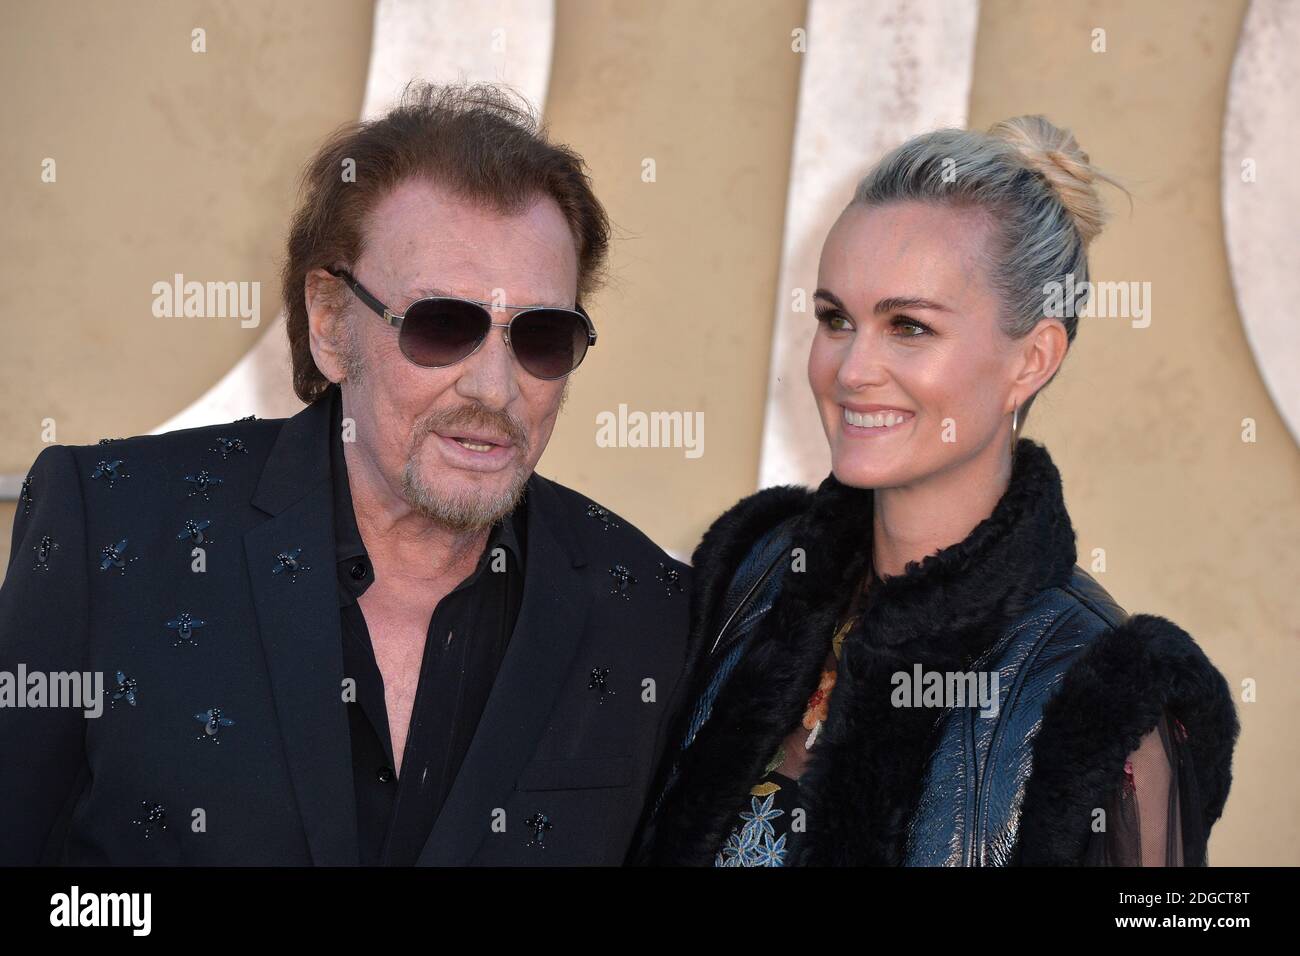 File photo : Johnny Hallyday and Laeticia Hallyday attend the Christian Dior Cruise 2018 on May 11th, 2017 in Calabasas, California. France's biggest rock star Johnny Hallyday has died from lung cancer, his wife says. He was 74. The singer - real name Jean-Philippe Smet - sold about 100 million records and starred in a number of films. Photo by ABACAPRESS.COM Stock Photo